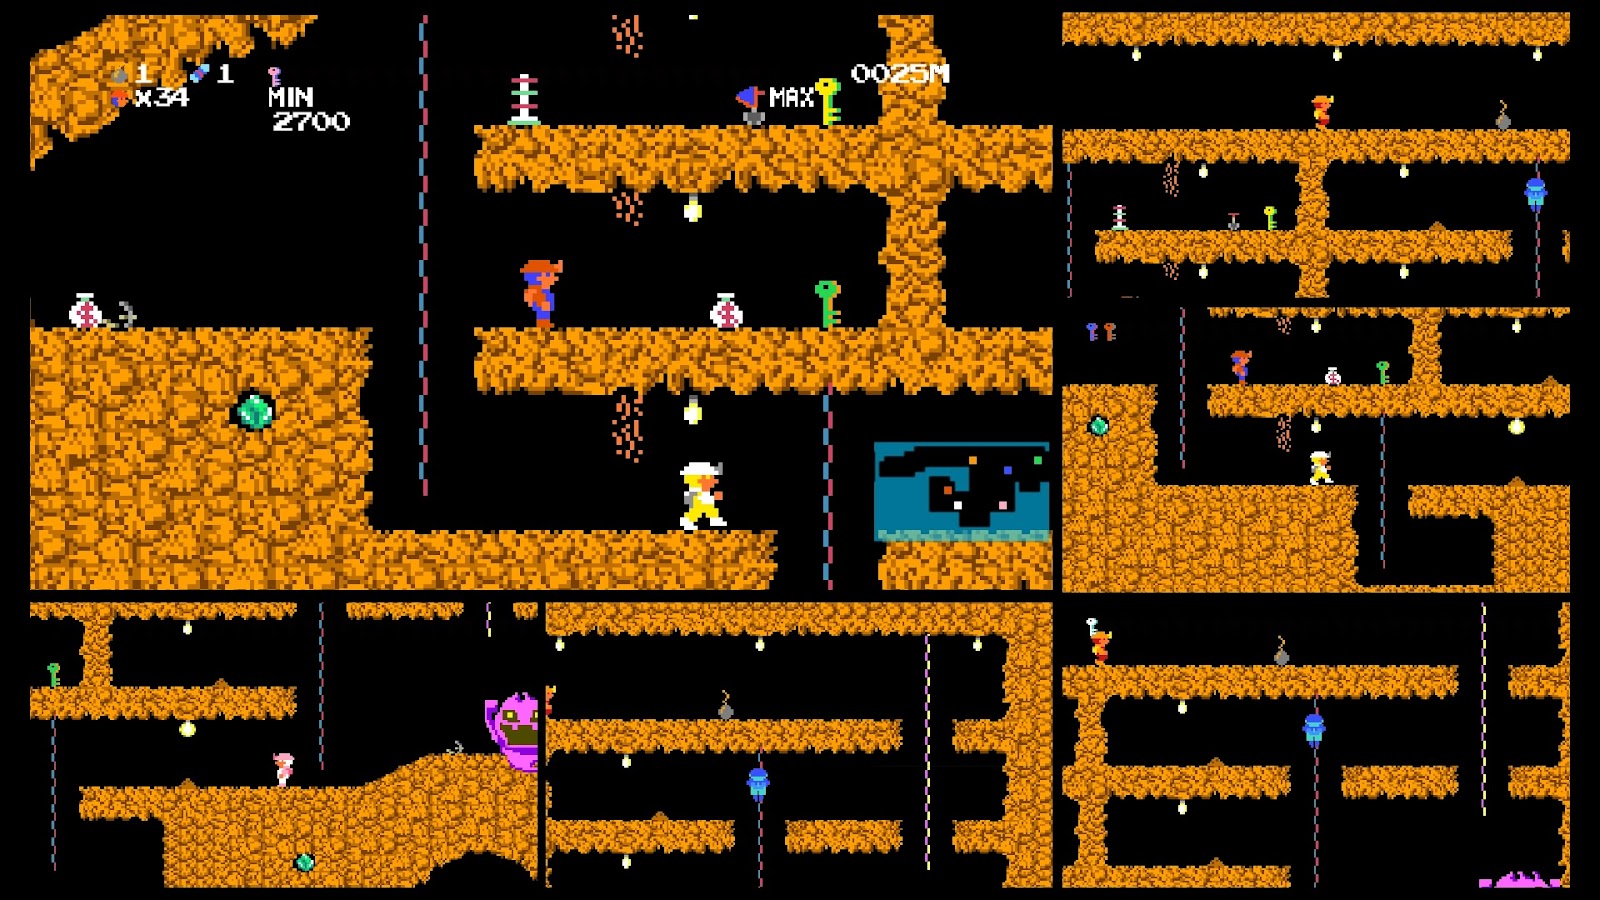 A screenshot showing the classic mode of Spelunker